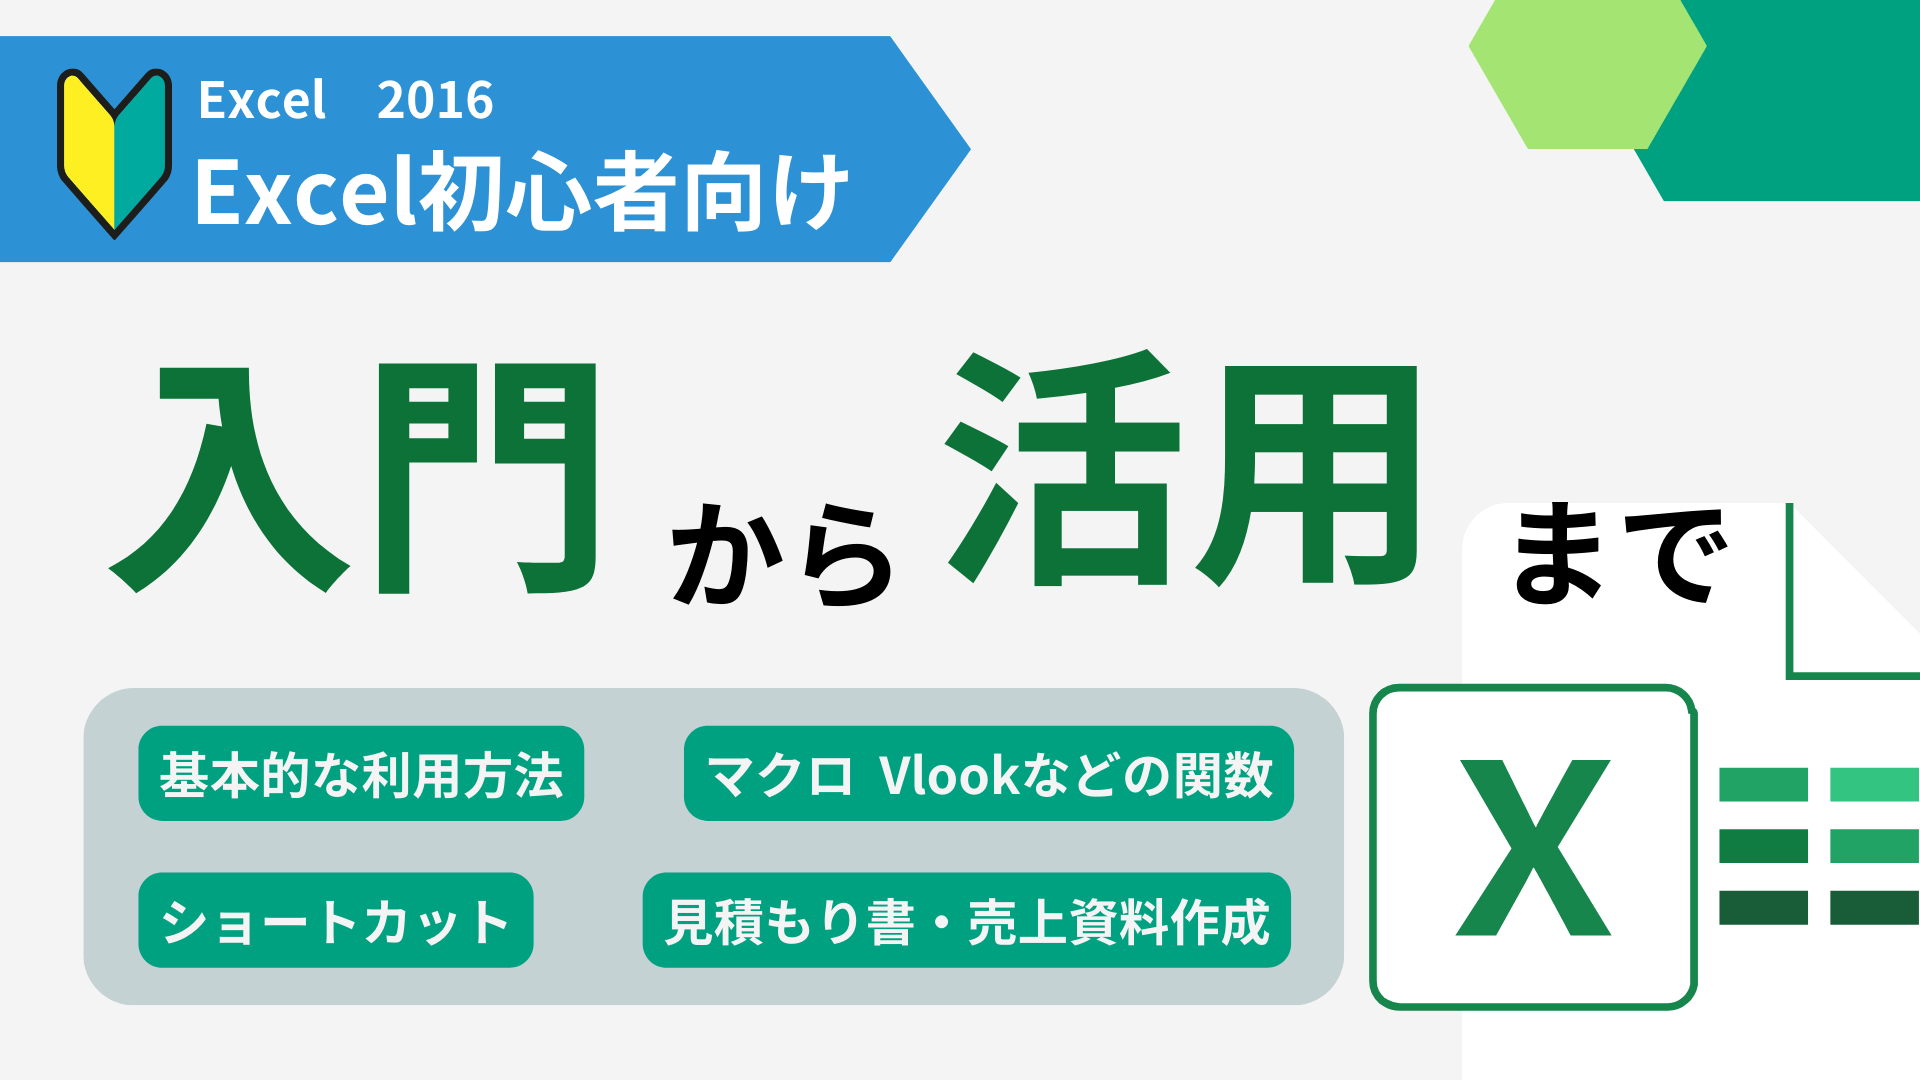 Excel 2016 Learning（入門から活用まで）